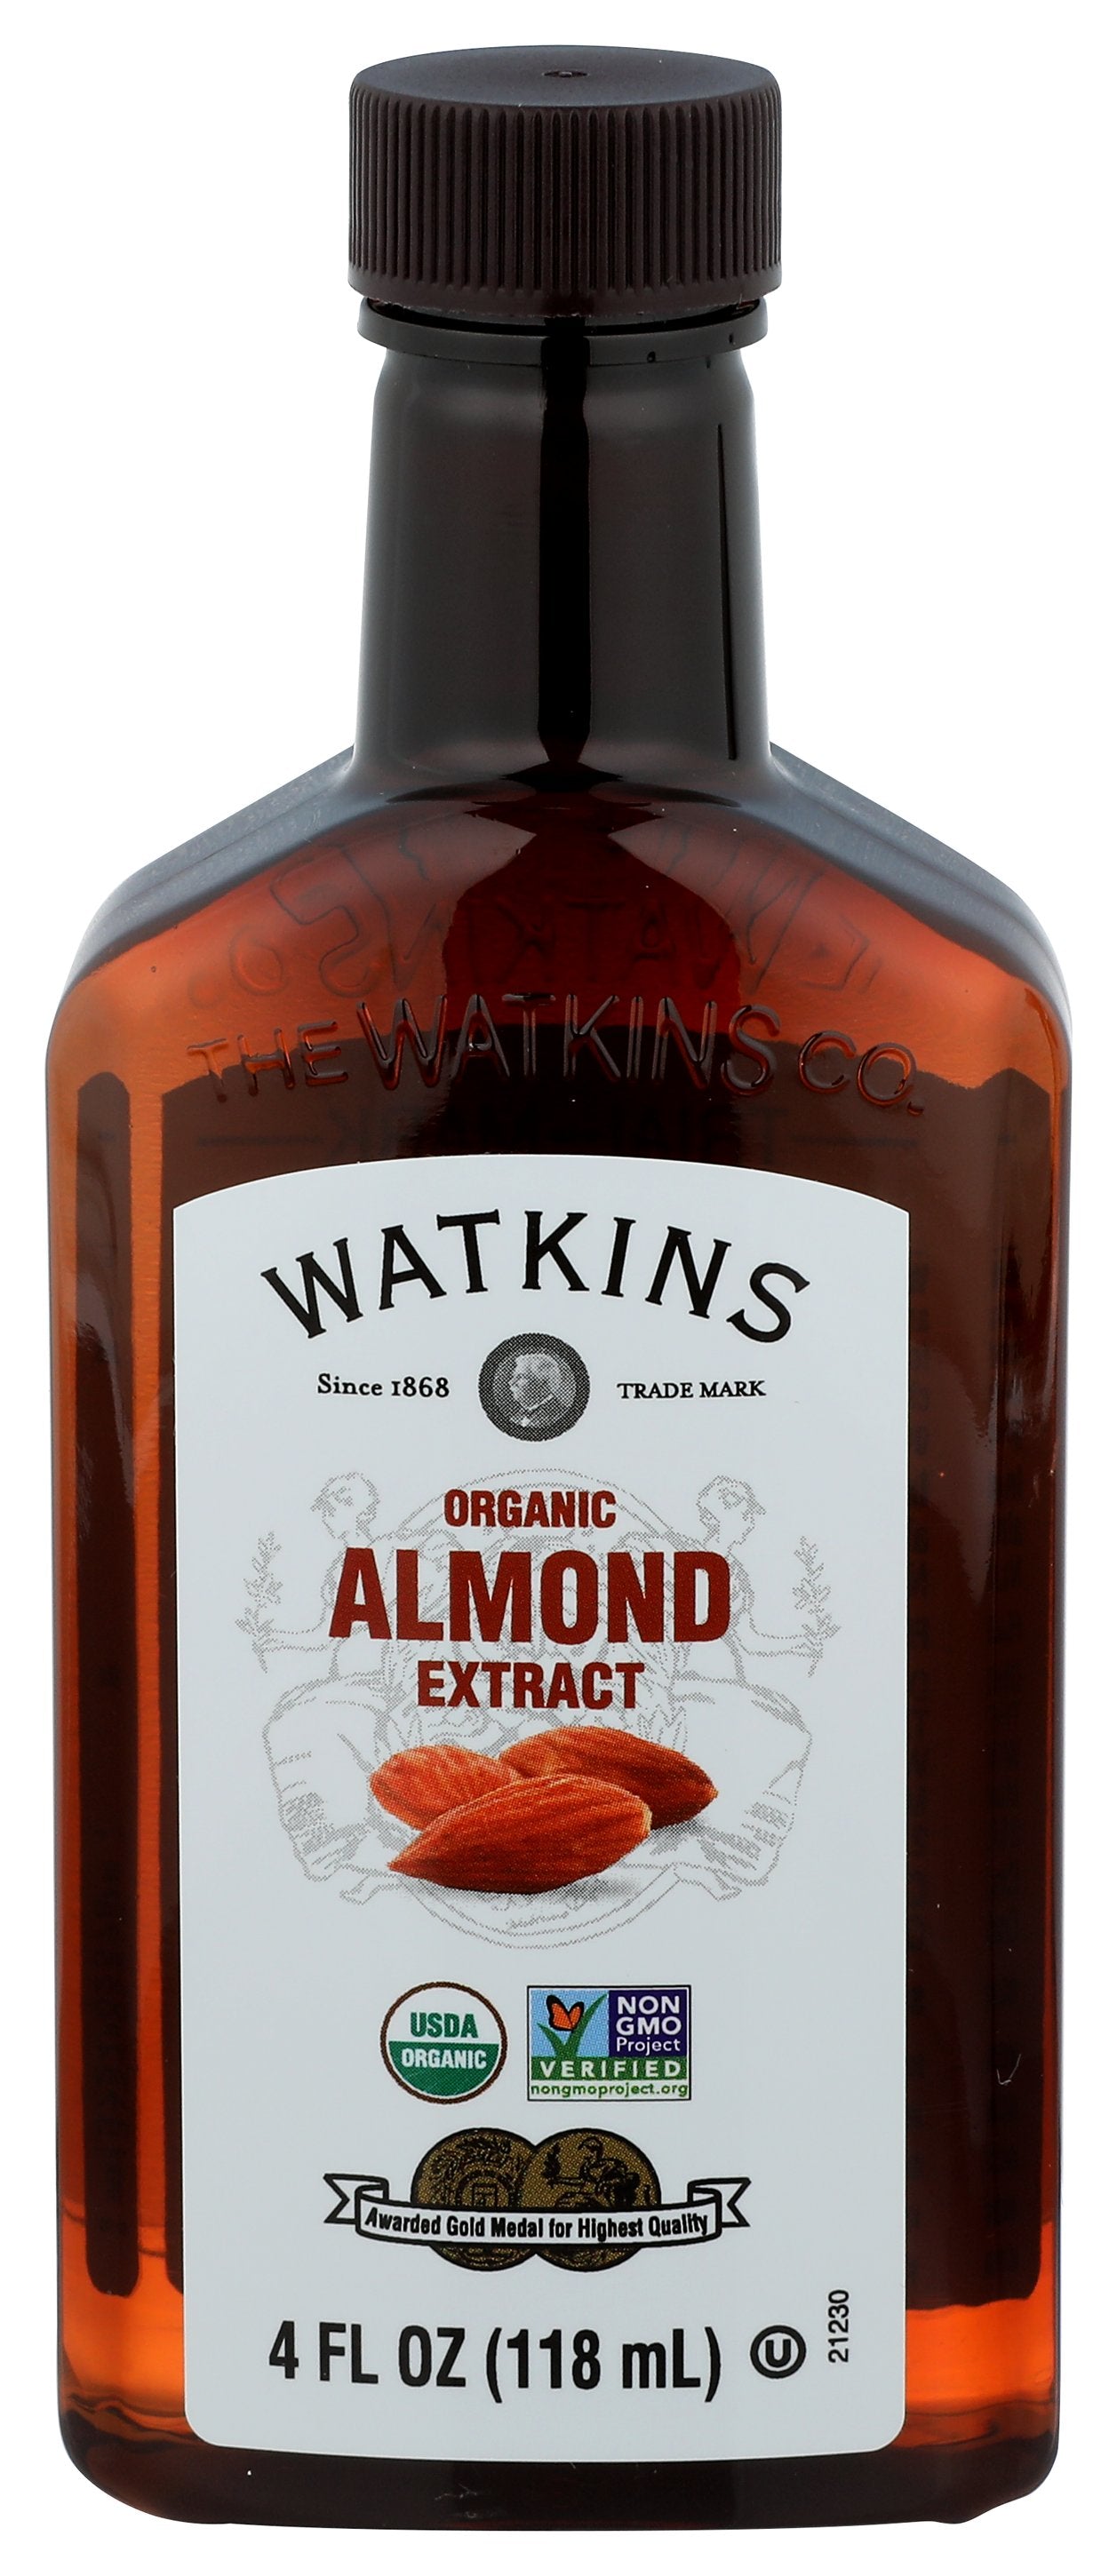 WATKINS EXTRACT ALMOND ORG - Case of 3